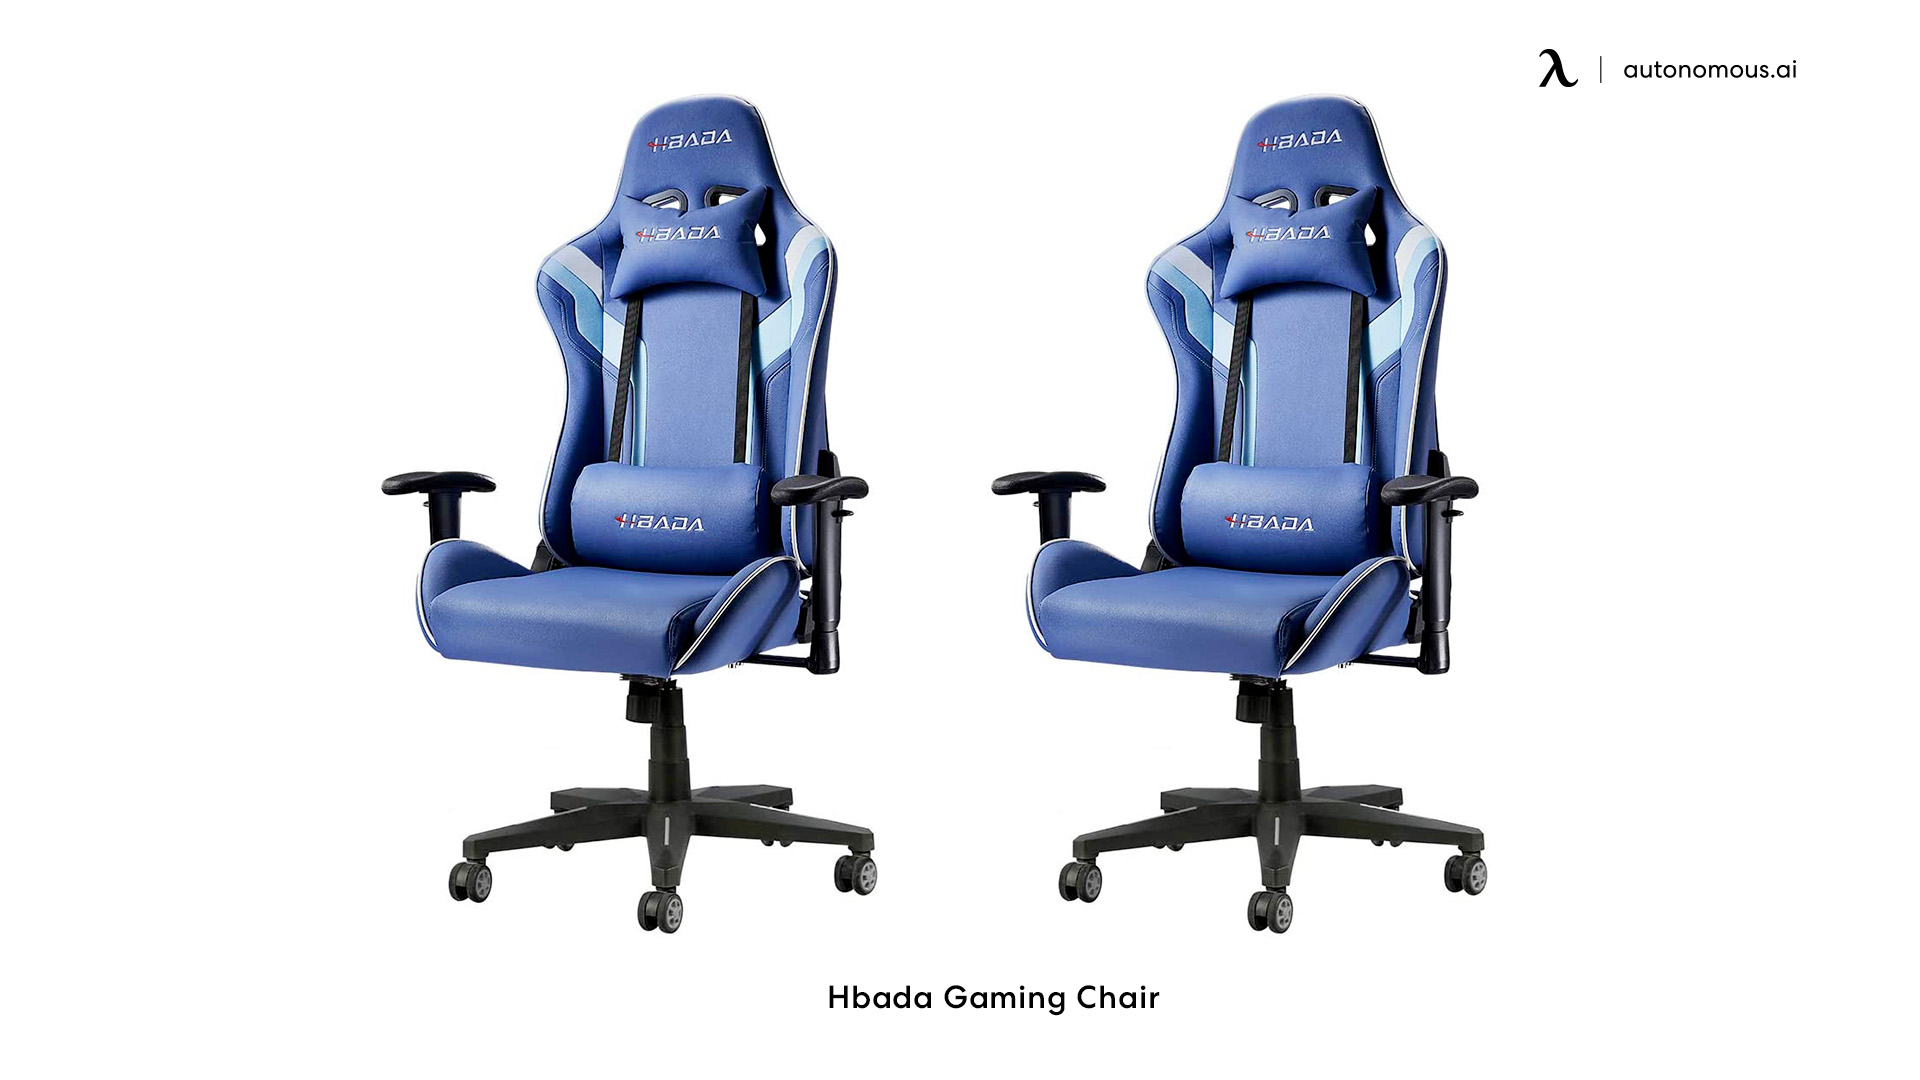 Hbada gaming chair with neck support